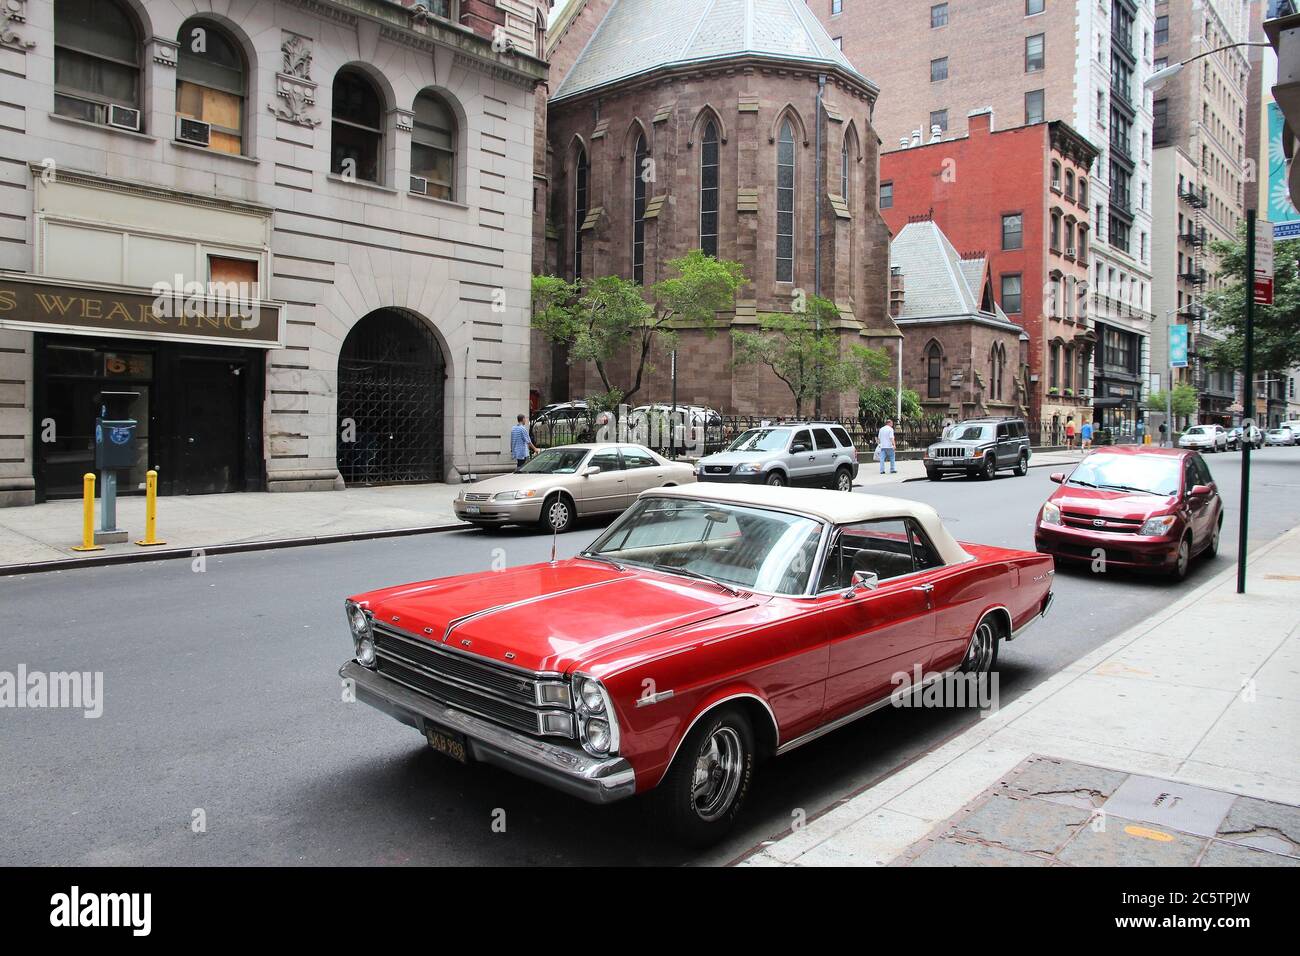 NEW YORK, USA - JULY 4, 2013: Classic Ford Galaxie parked in New York. Ford Galaxie was manufactured in years 1959-1974. Stock Photo